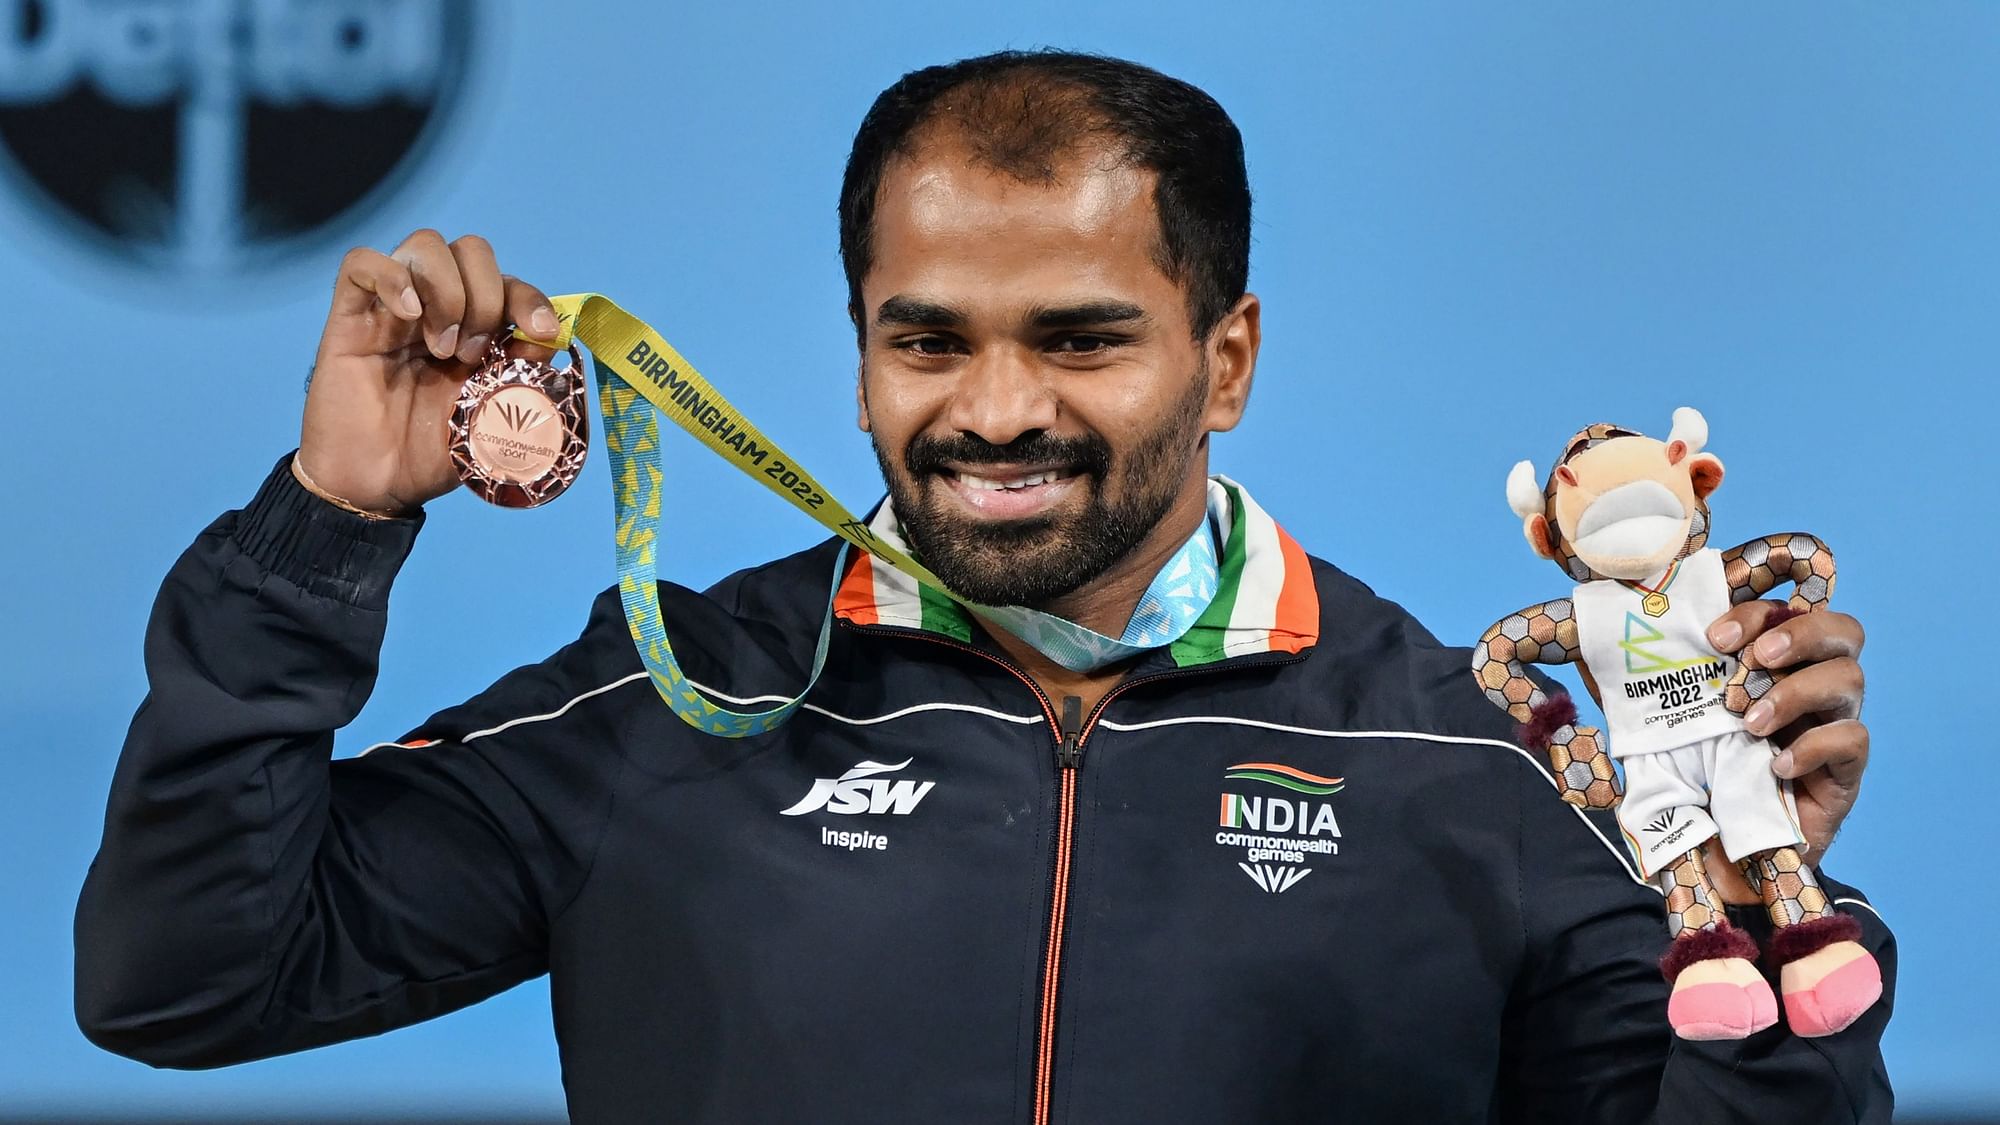 <div class="paragraphs"><p>Birmingham: India's Gururaja Poojary poses with the bronze medal after winning Men's 61kg Weightlifting category match of the Commonwealth Games 2022.</p></div>